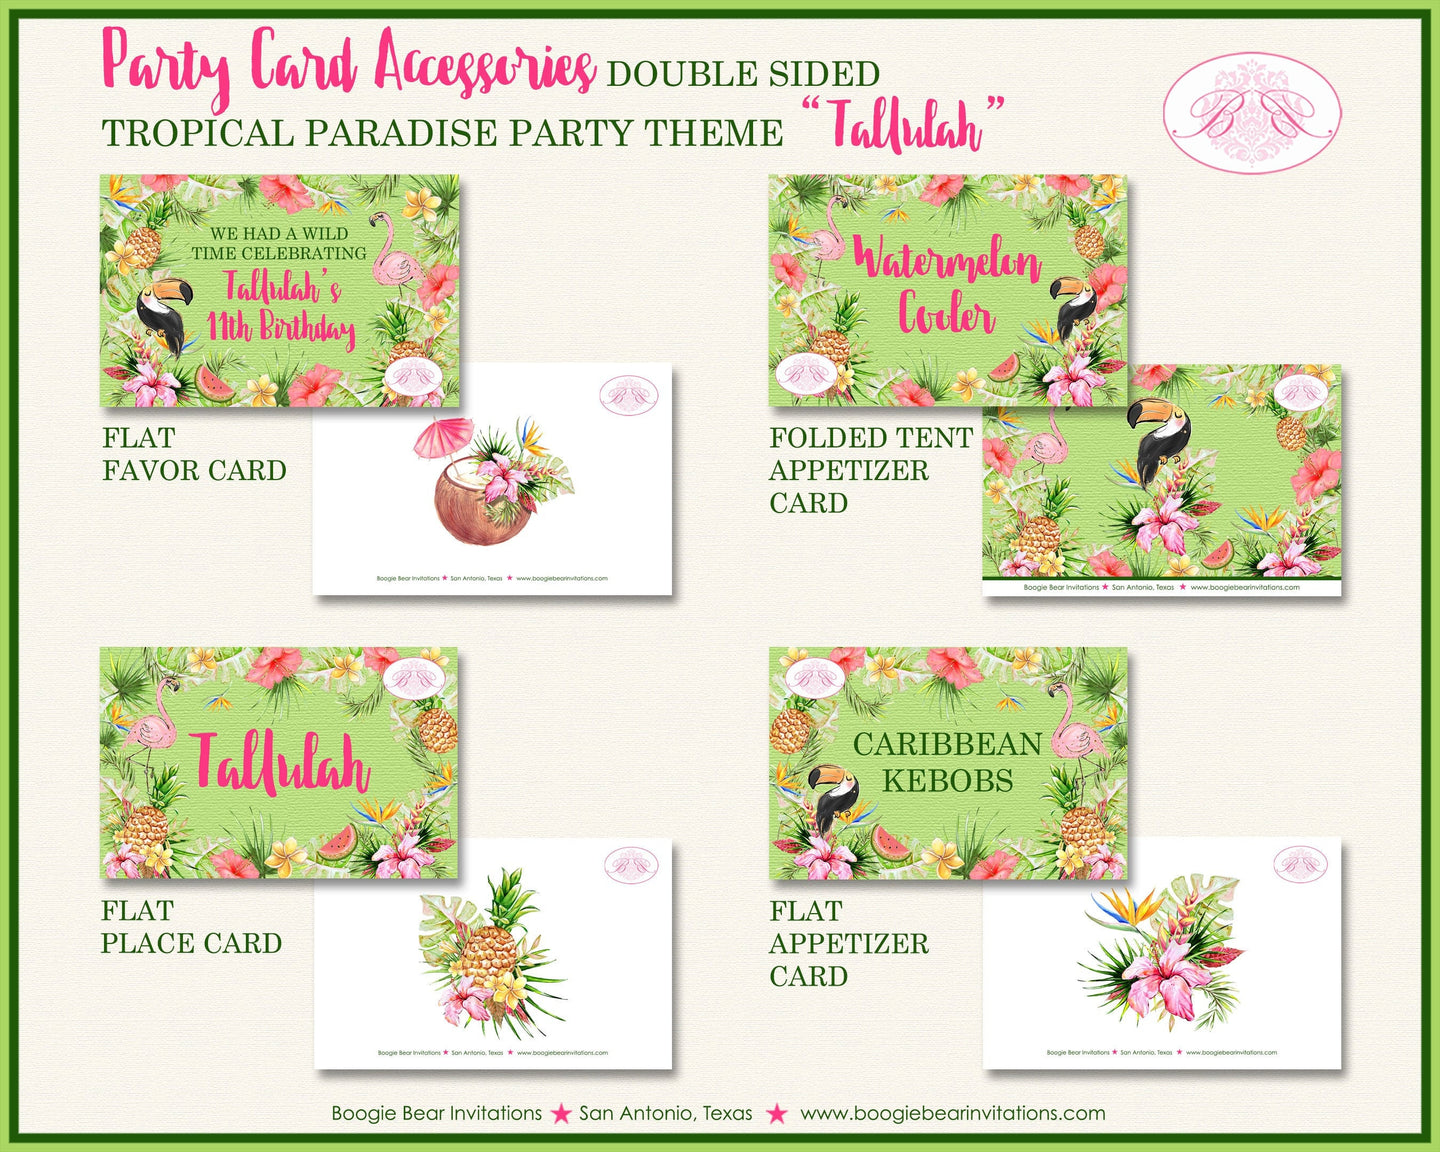 Tropical Paradise Birthday Party Favor Card Place Food Appetizer Girl Flamingo Toucan Pink Gold Green Boogie Bear Invitations Tallulah Theme